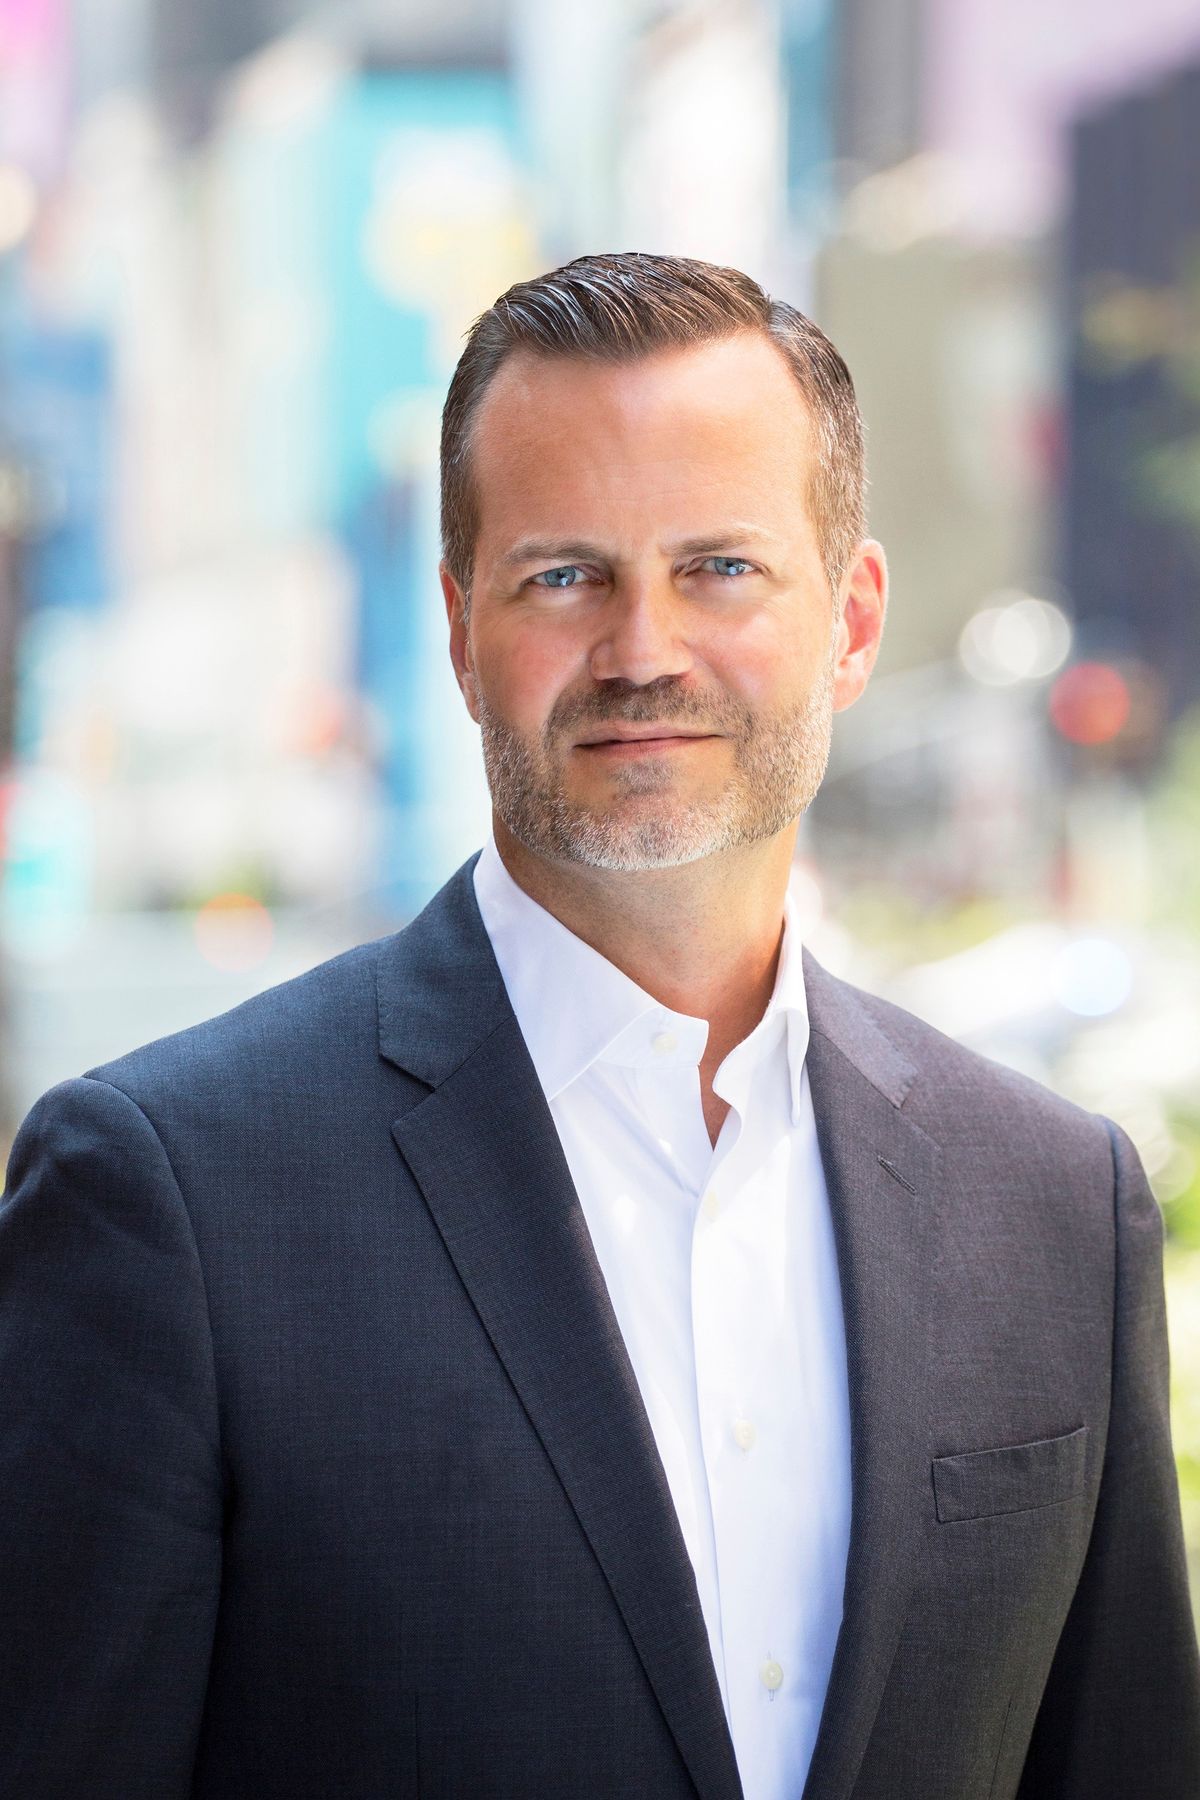 NYC’s Fred Dixon Departs to Lead Brand USA